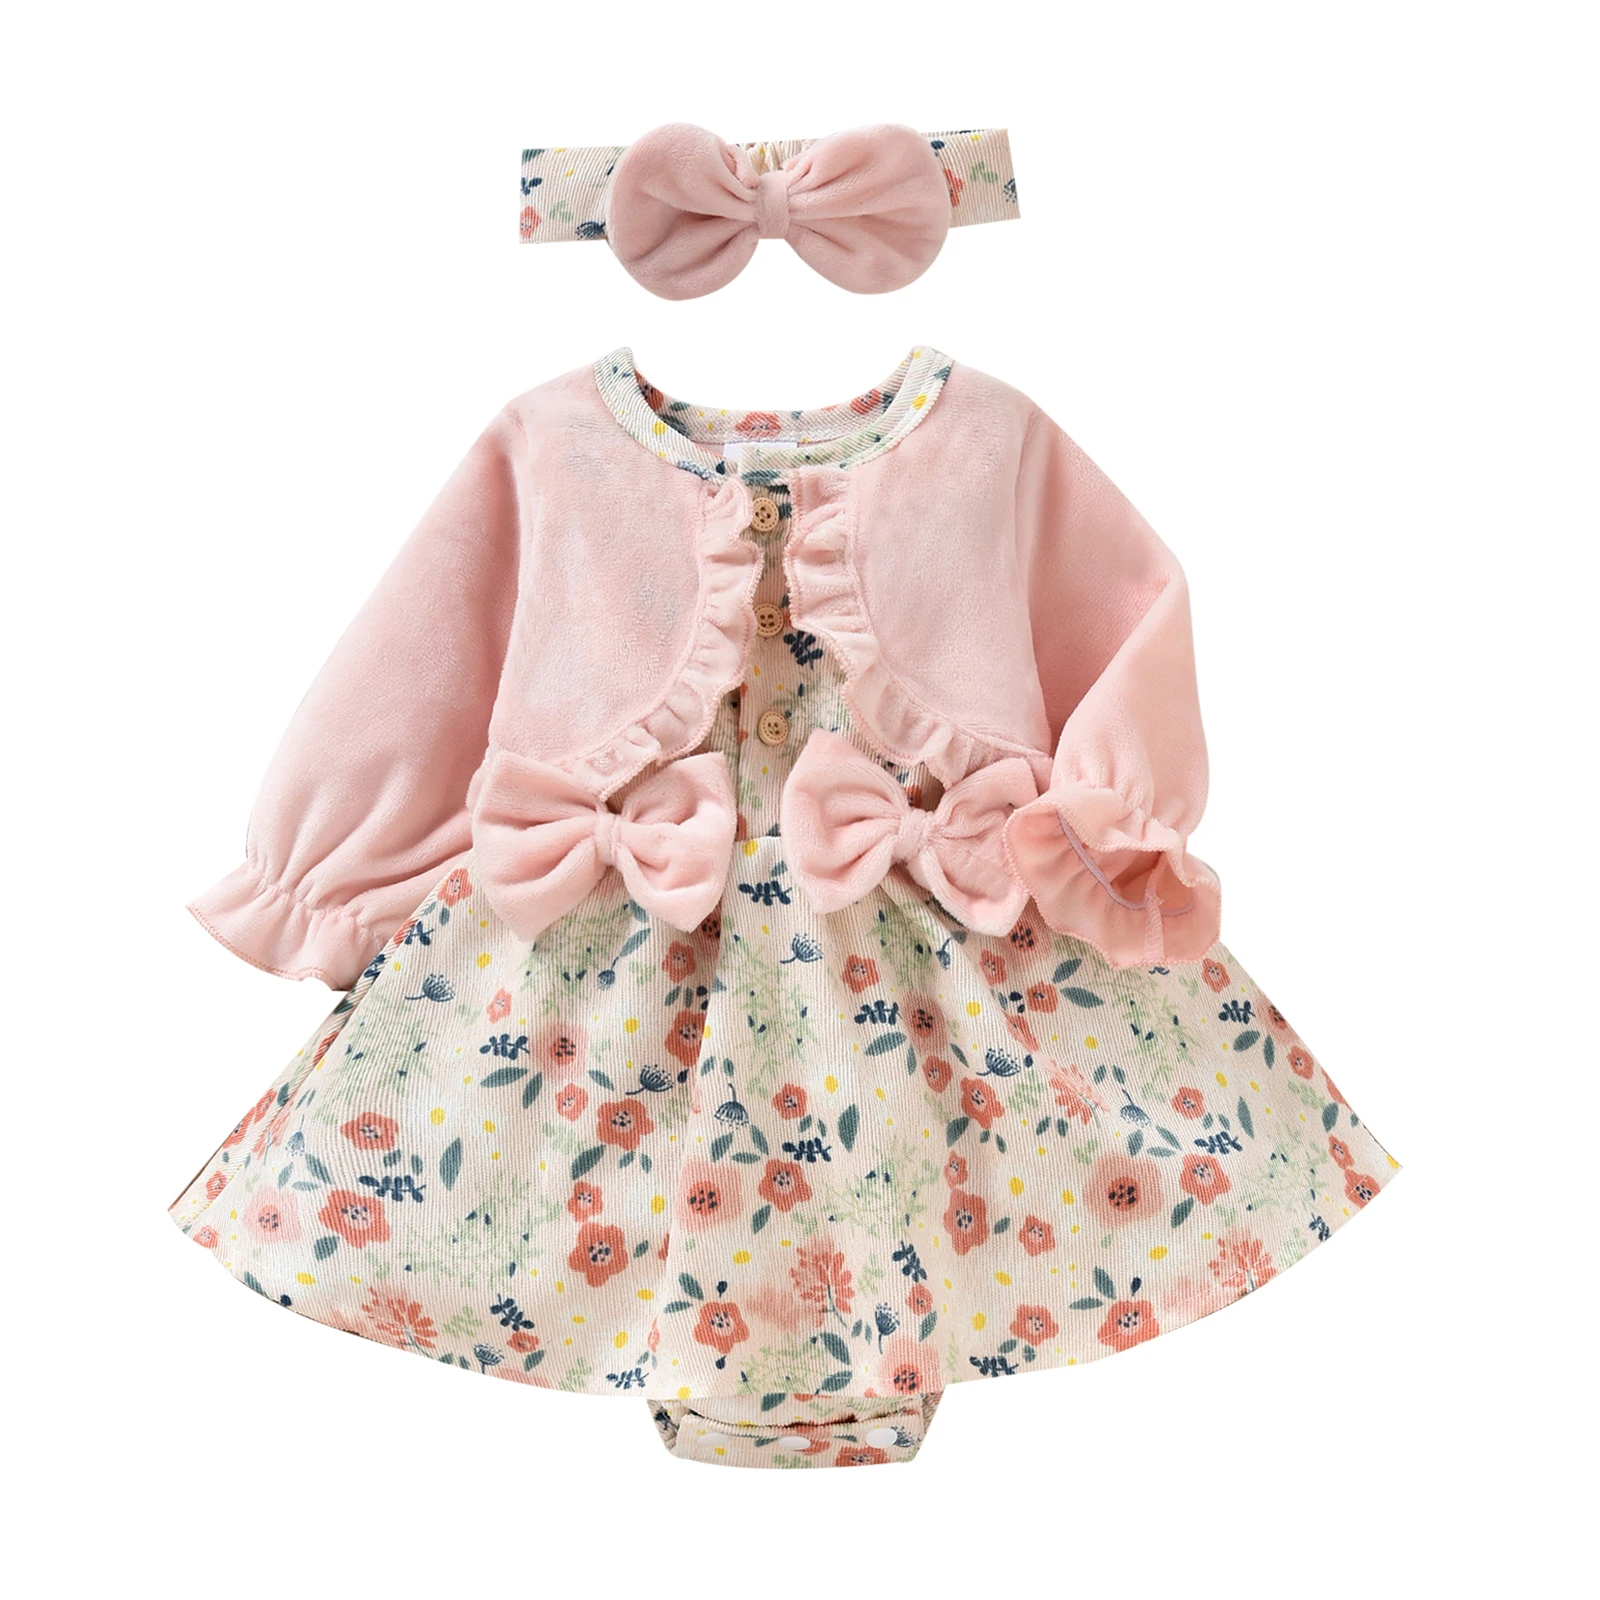 Ma&Baby 0-18M Newborn Infant Baby Girls Rompers Princess Bow Long Sleeve Flower Jumpsuit Playsuit Autumn Spring  Costumes D95 Newborn Sailor Romper Girls Boy Costume Anchor